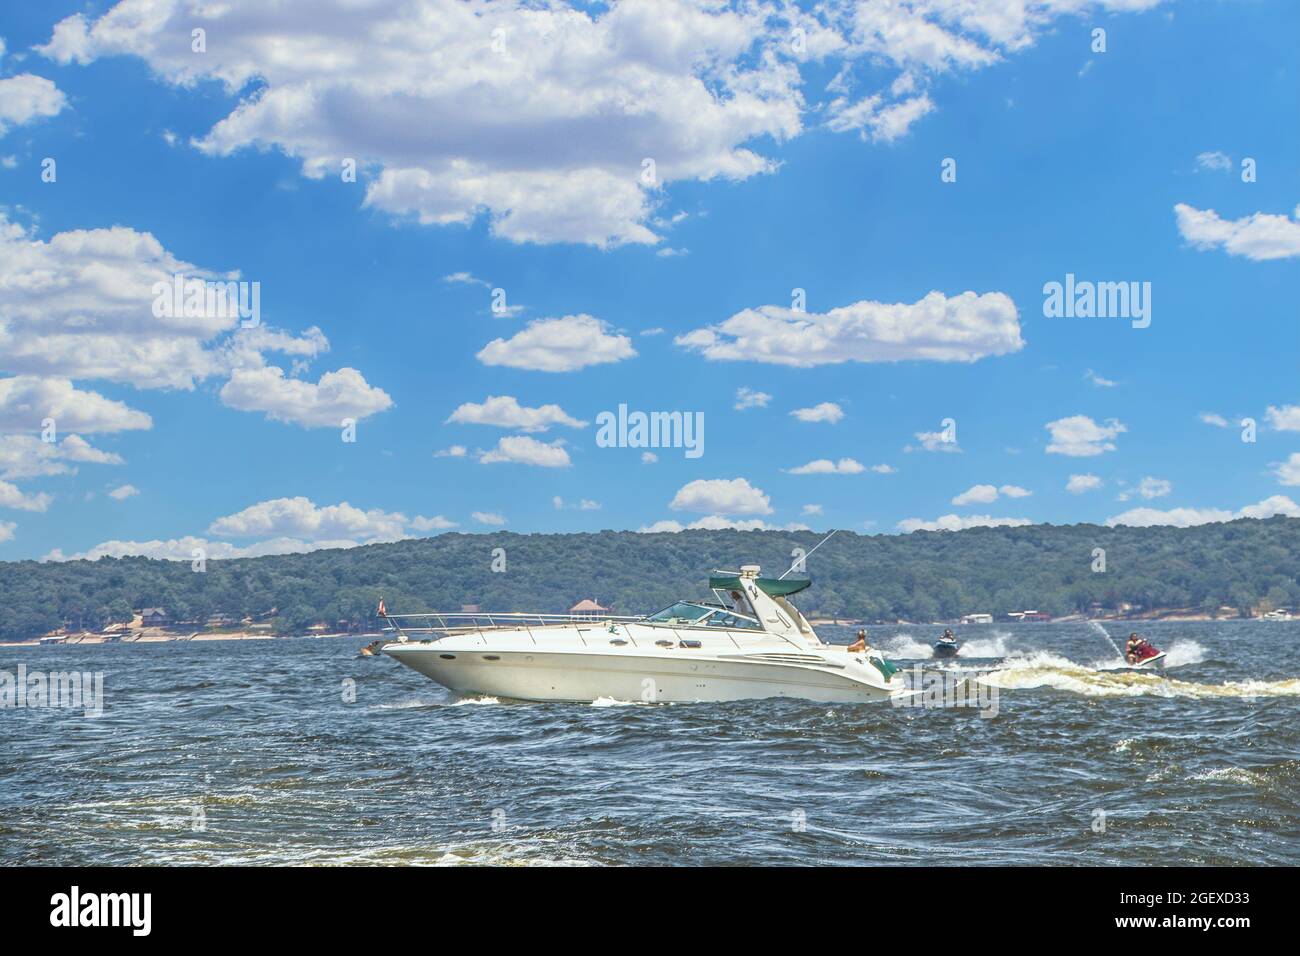 Motor yacht speeds across lake under pretty cloudy sky and riders of pwc jump the wake - shore with docks in distance Stock Photo